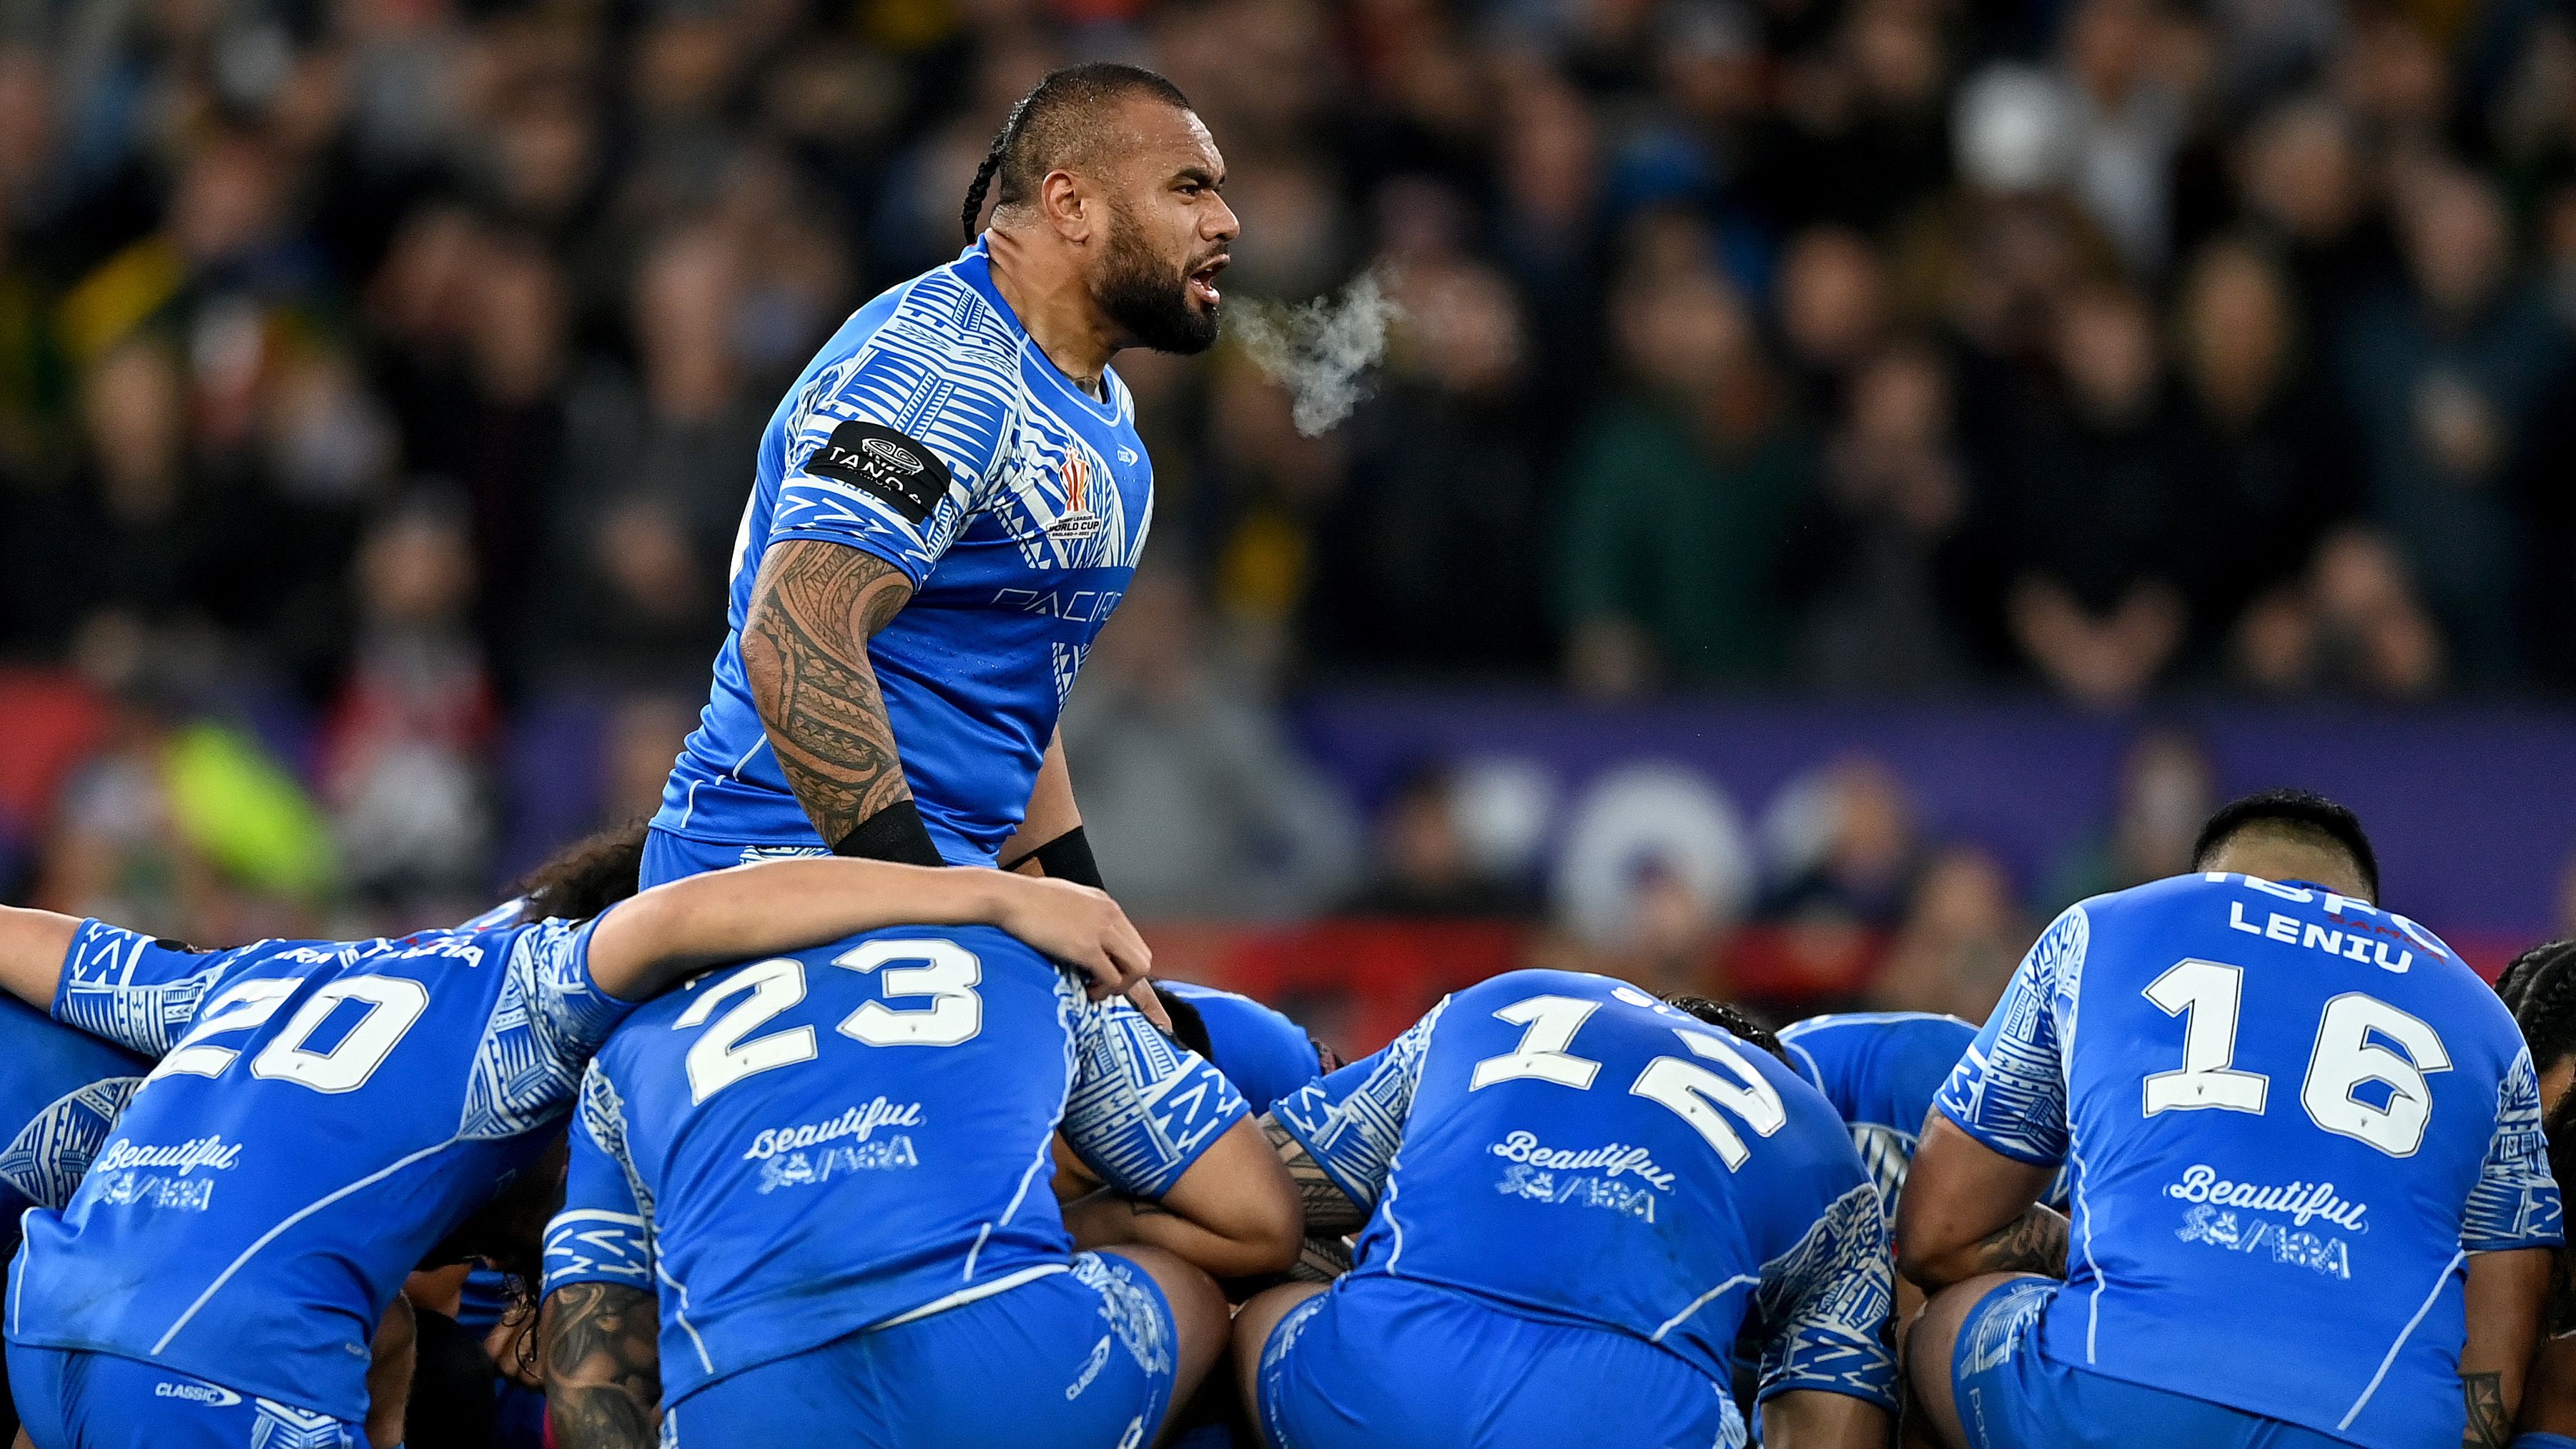 Junior Paulo of Samoa leads the Siva Tau prior to the Rugby League World Cup Final match between Australia and Samoa at Old Trafford on November 19, 2022 in Manchester, England. (Photo by Gareth Copley/Getty Images)